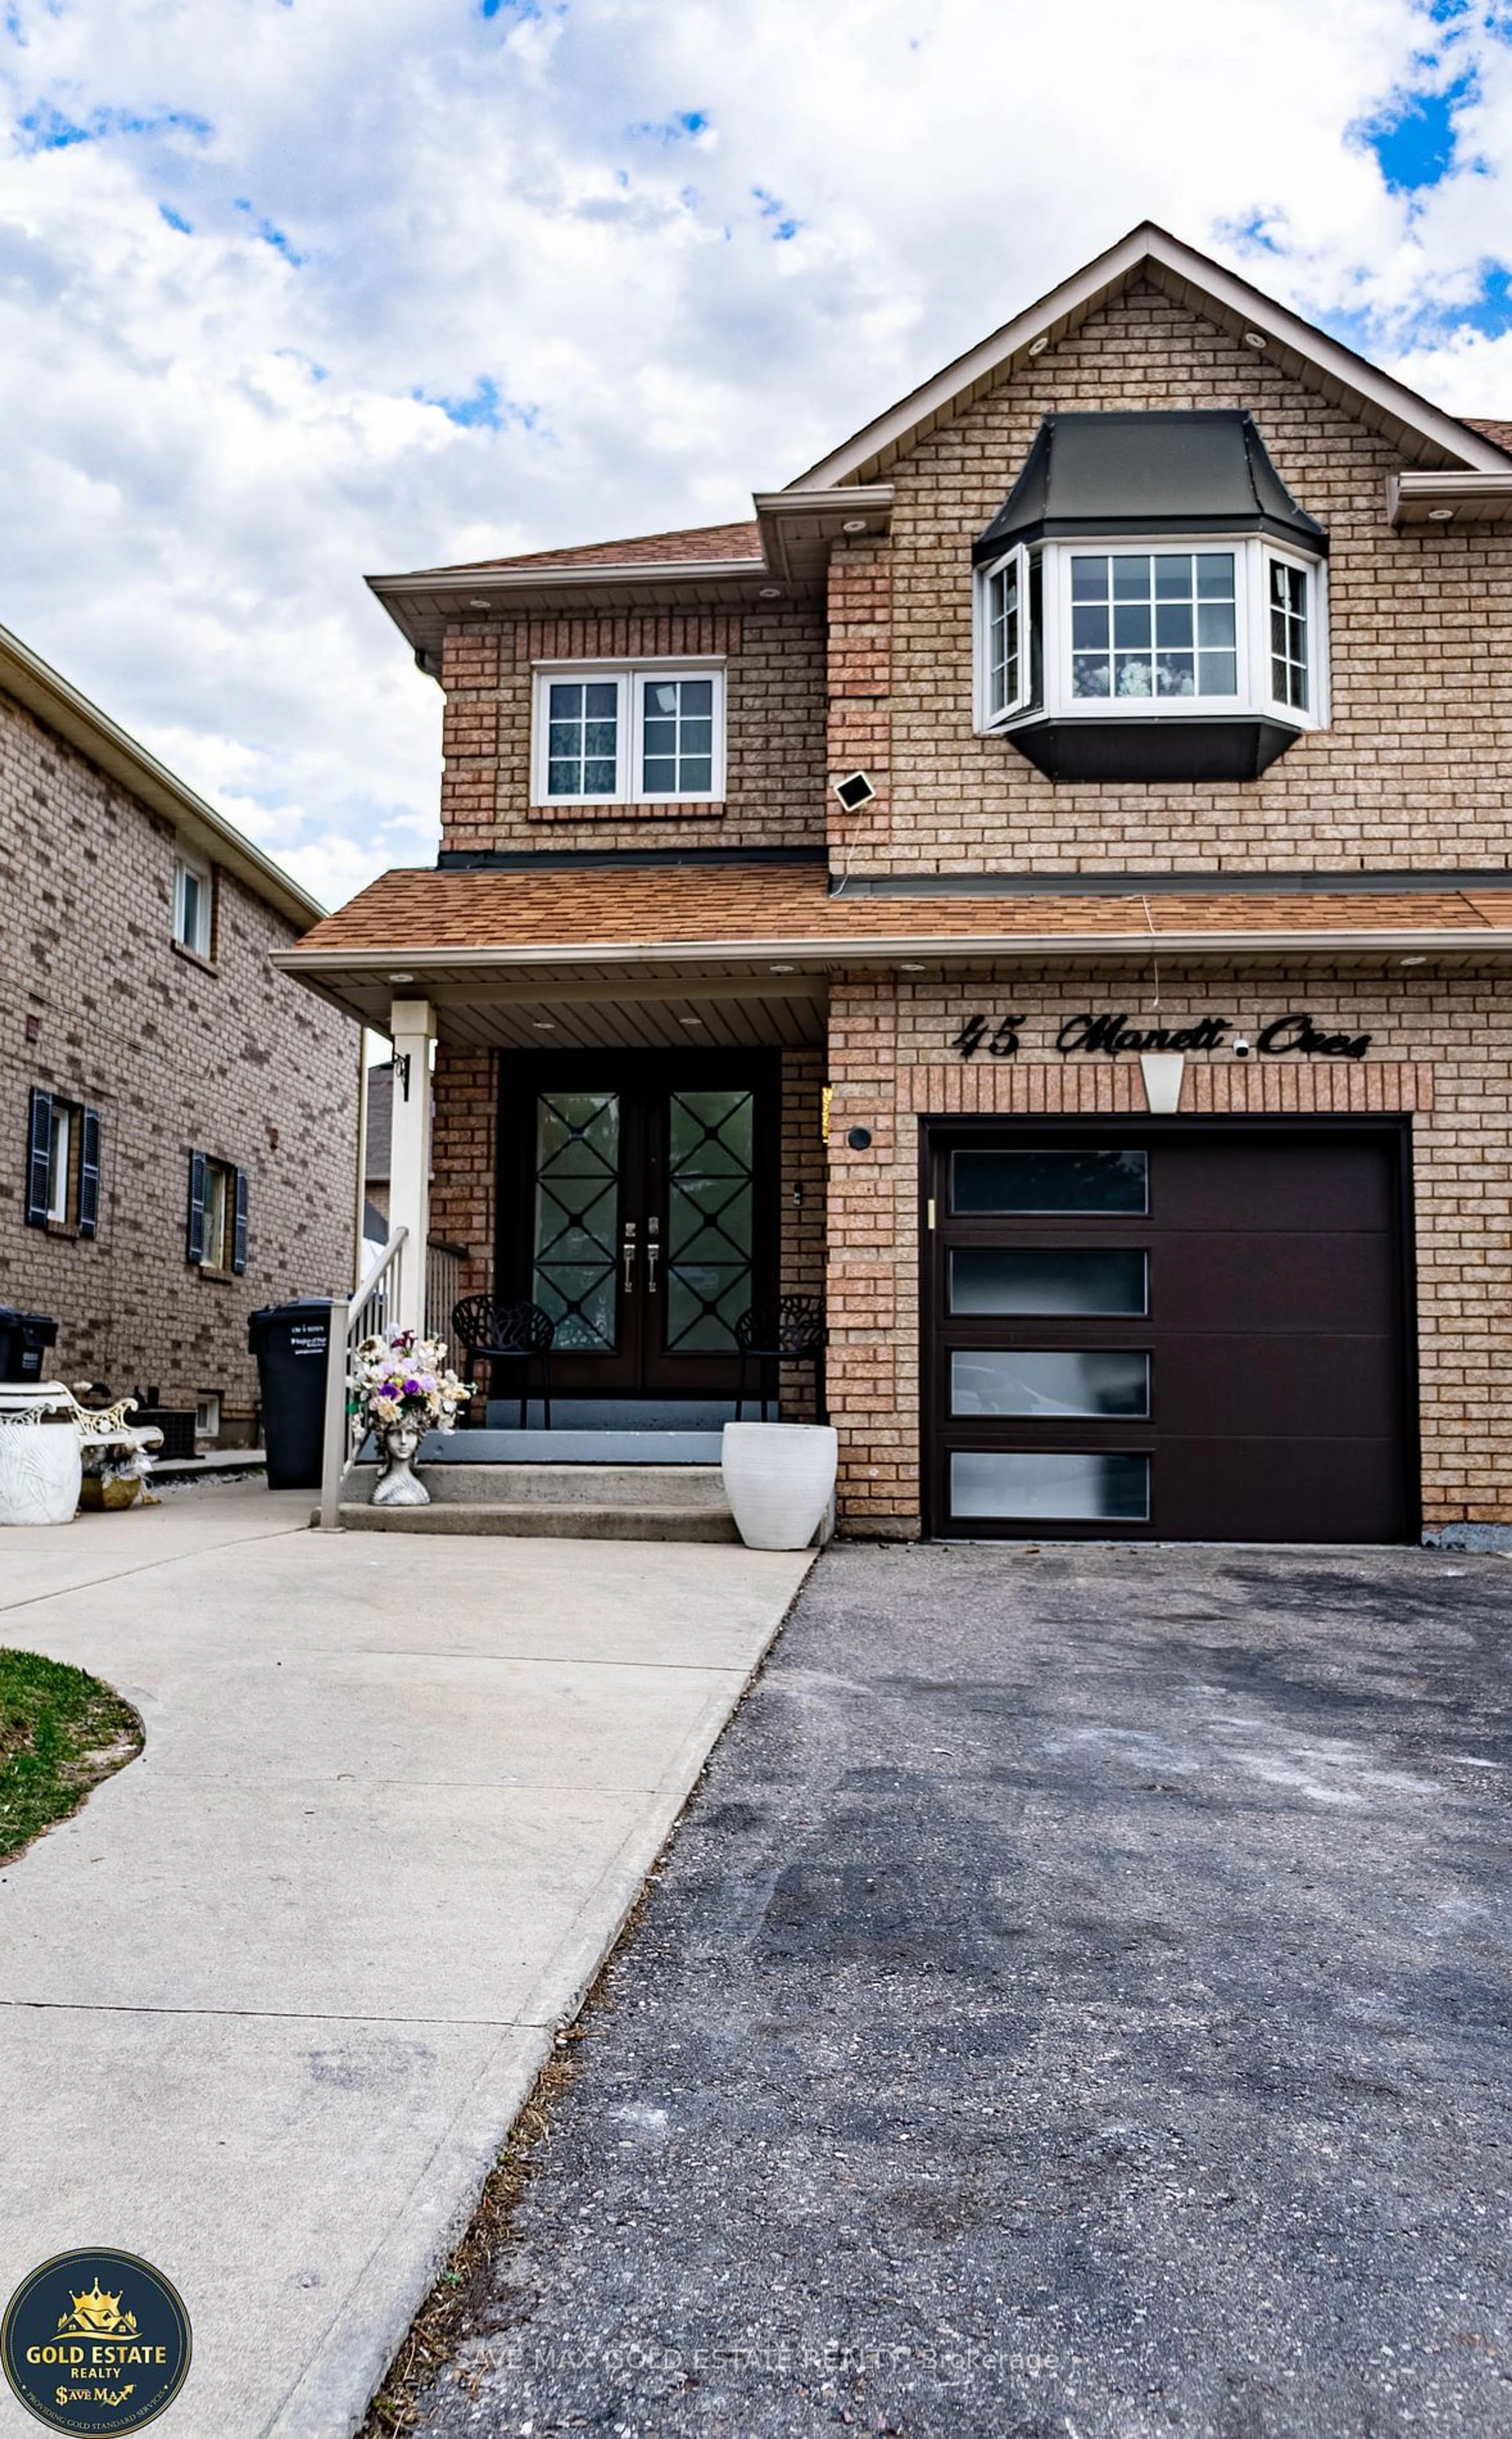 Home with brick exterior material for 45 Manett Cres, Brampton Ontario L6X 4X4